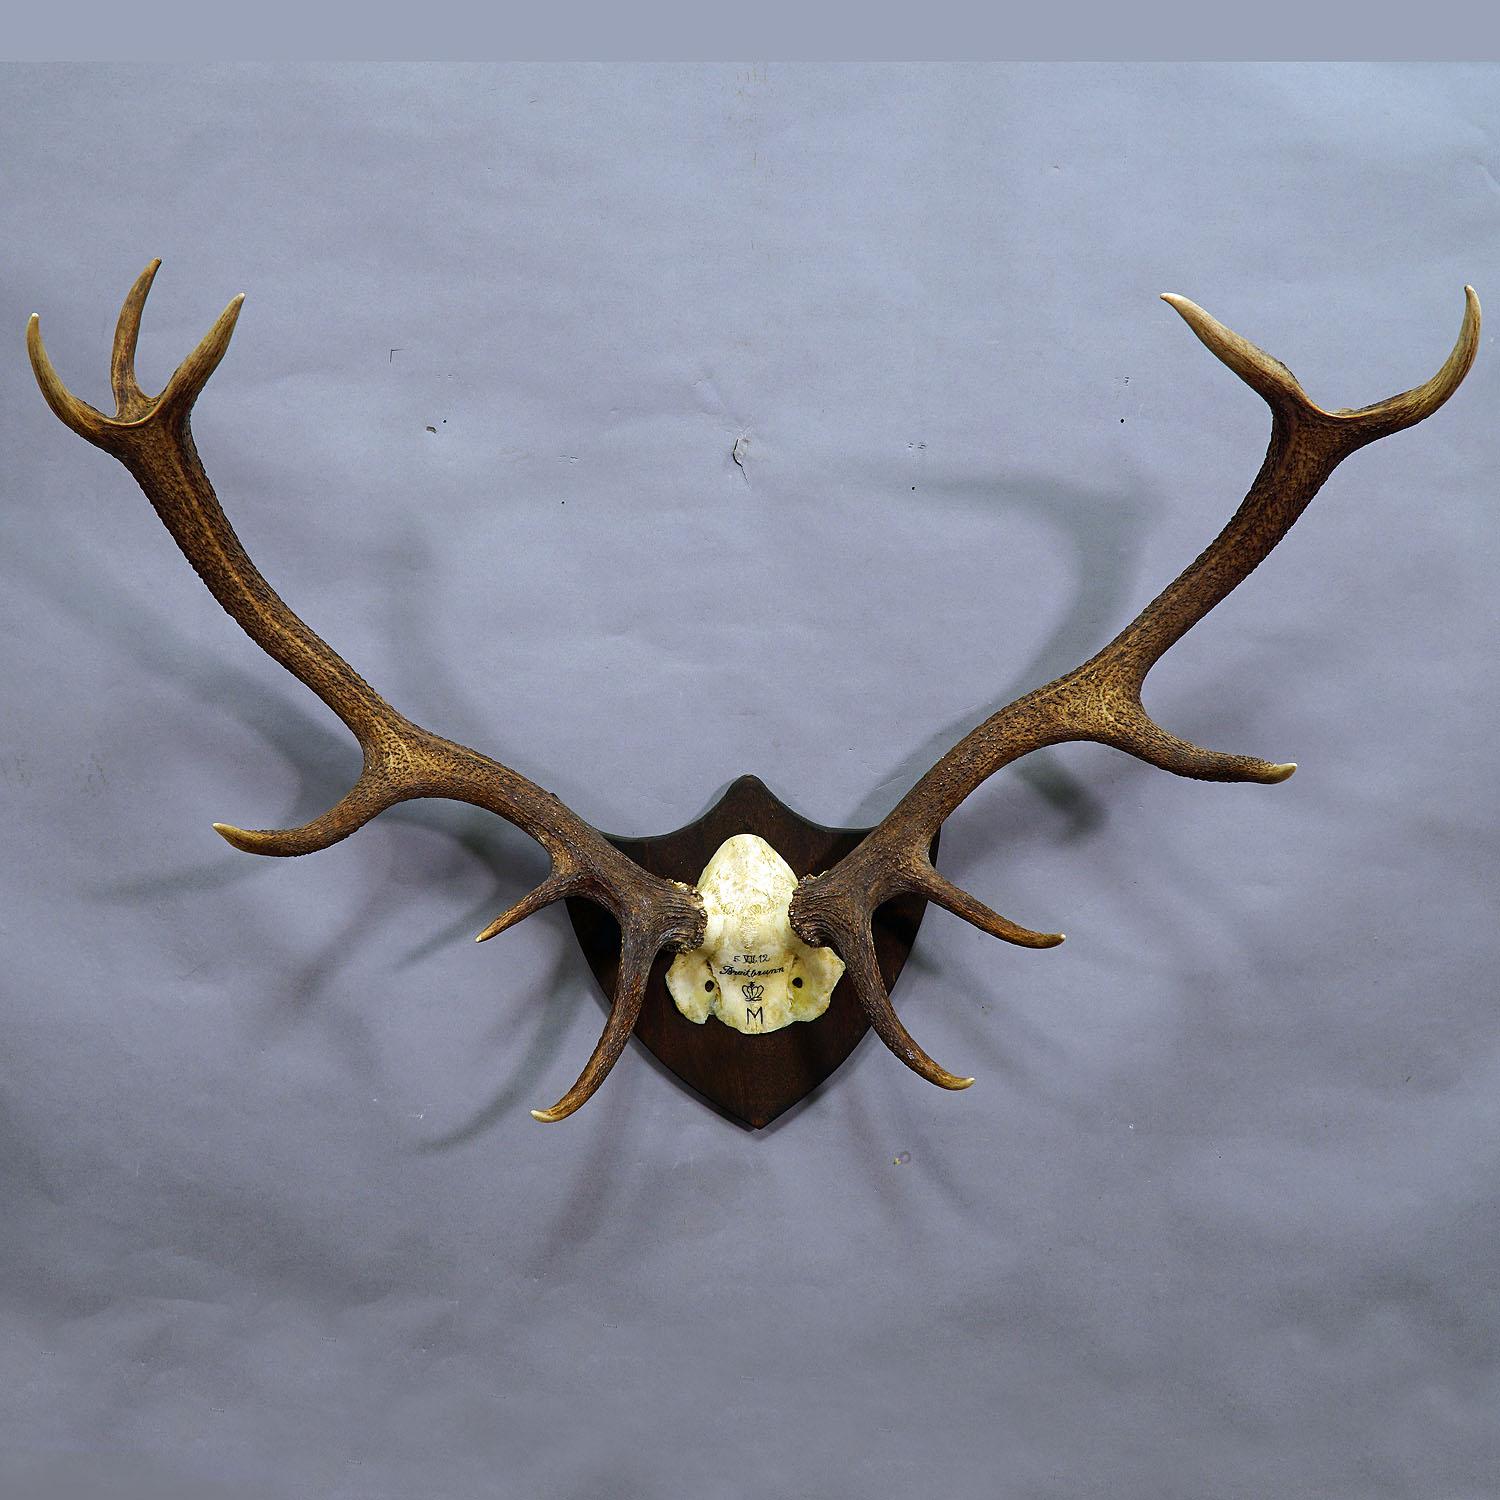 A 10 pointer Black Forest deer trophy from the palace of Salem in south Germany. Shoot by a member of the lordly family of Baden in 1912. Handwritten inscriptions on the skull with, place of the hunt, family crest and date. Mounted on a nice